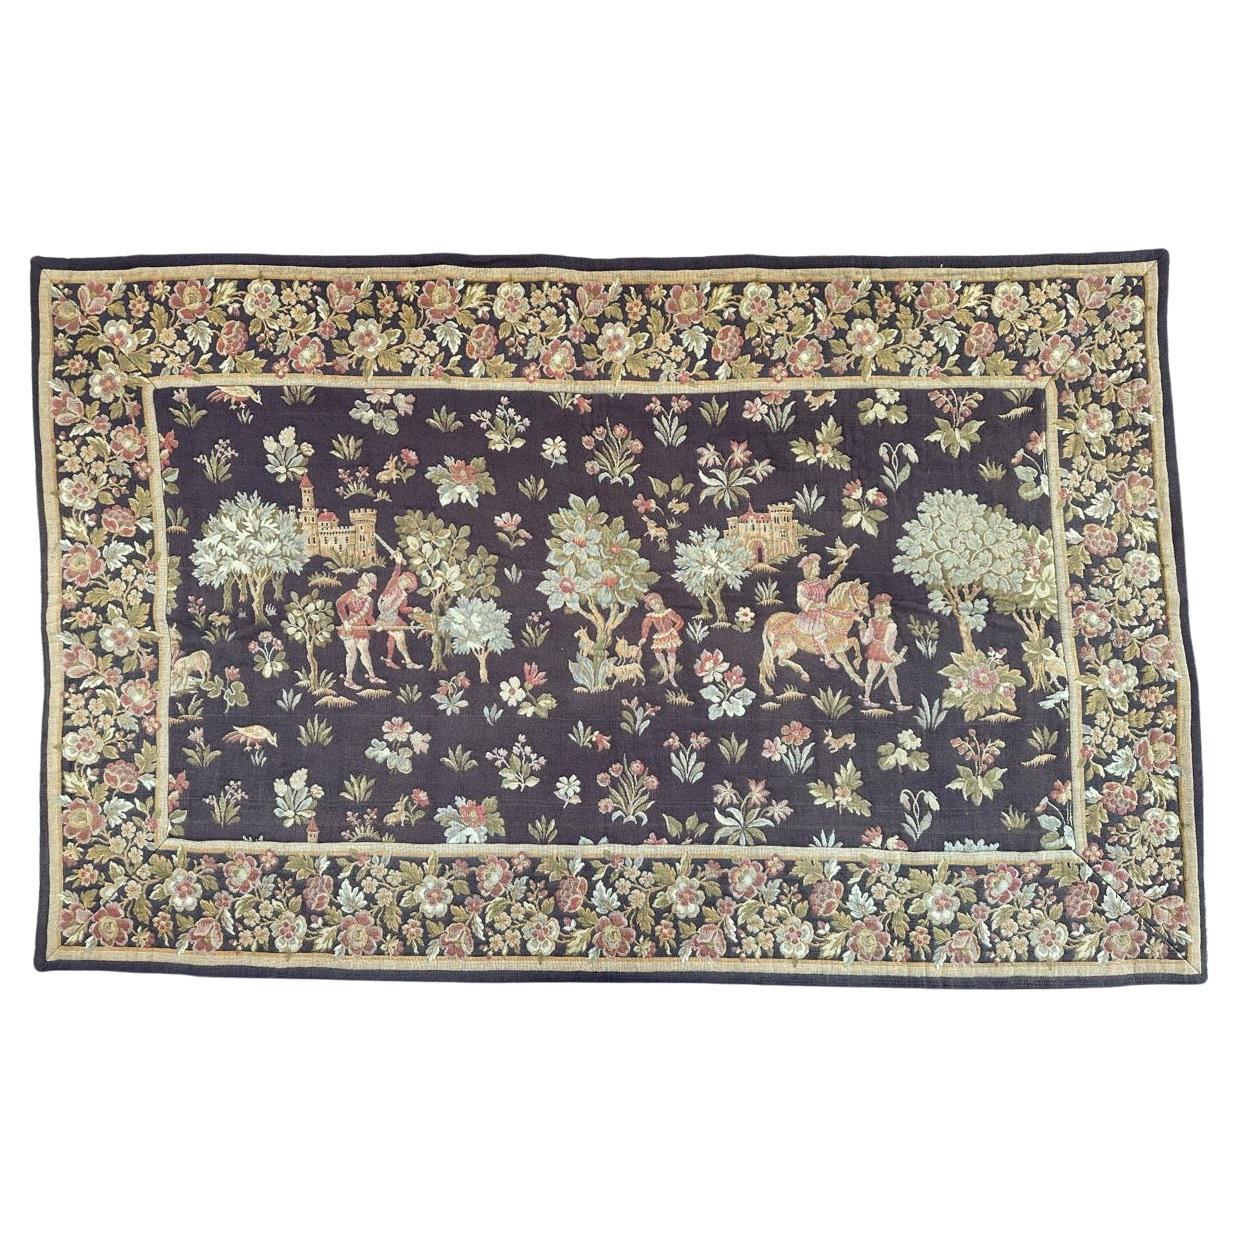 Bobyrug’s Nice French Aubusson Style Medieval Design Jaquar Tapestry For Sale